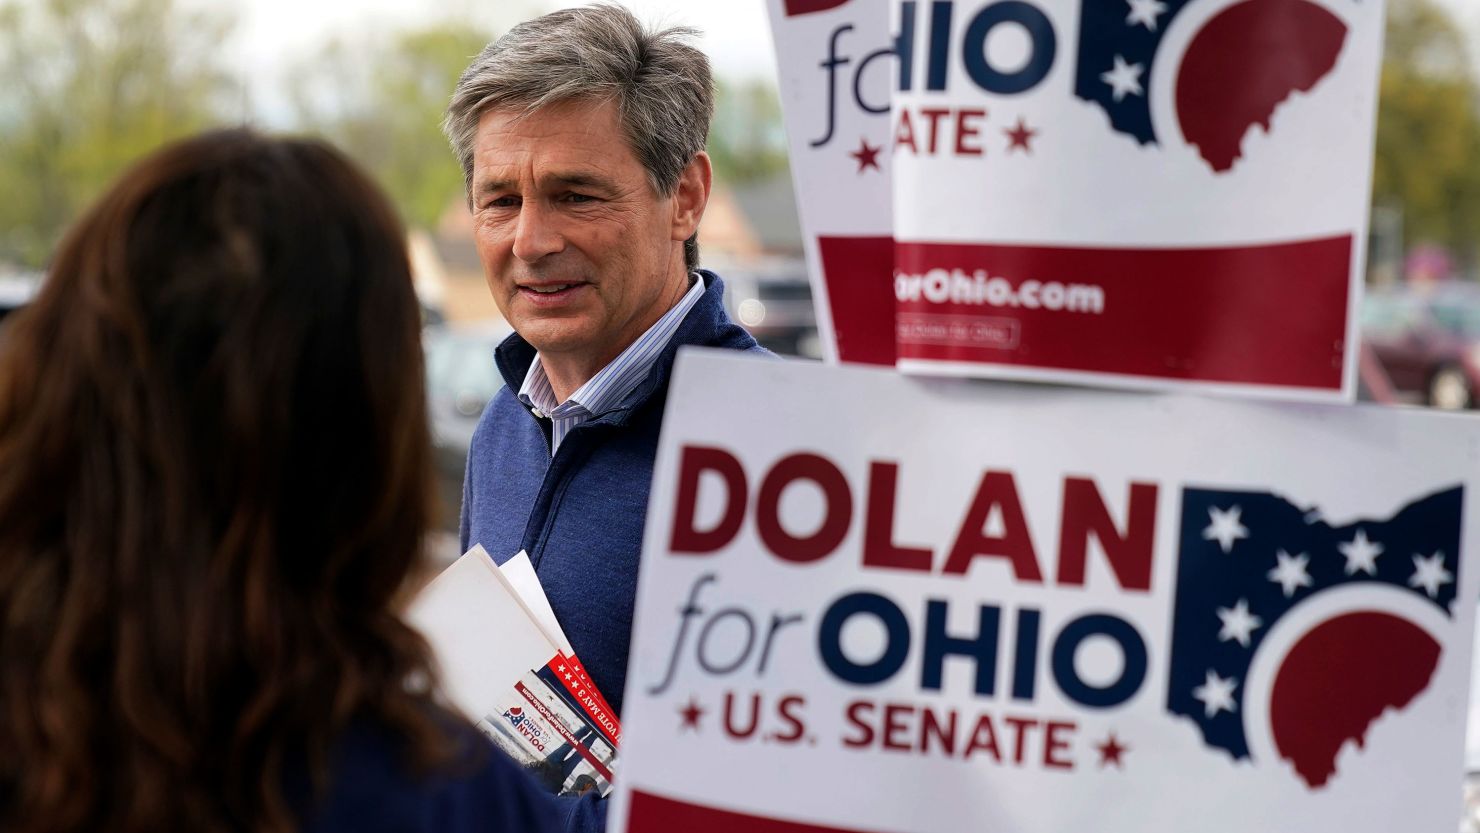 Republican US Senate candidate Matt Dolan visits with a campaign worker outside a polling place at the Parma Heights Baptist Church in Parma Heights, Ohio, on Tuesday, May 3, 2022.